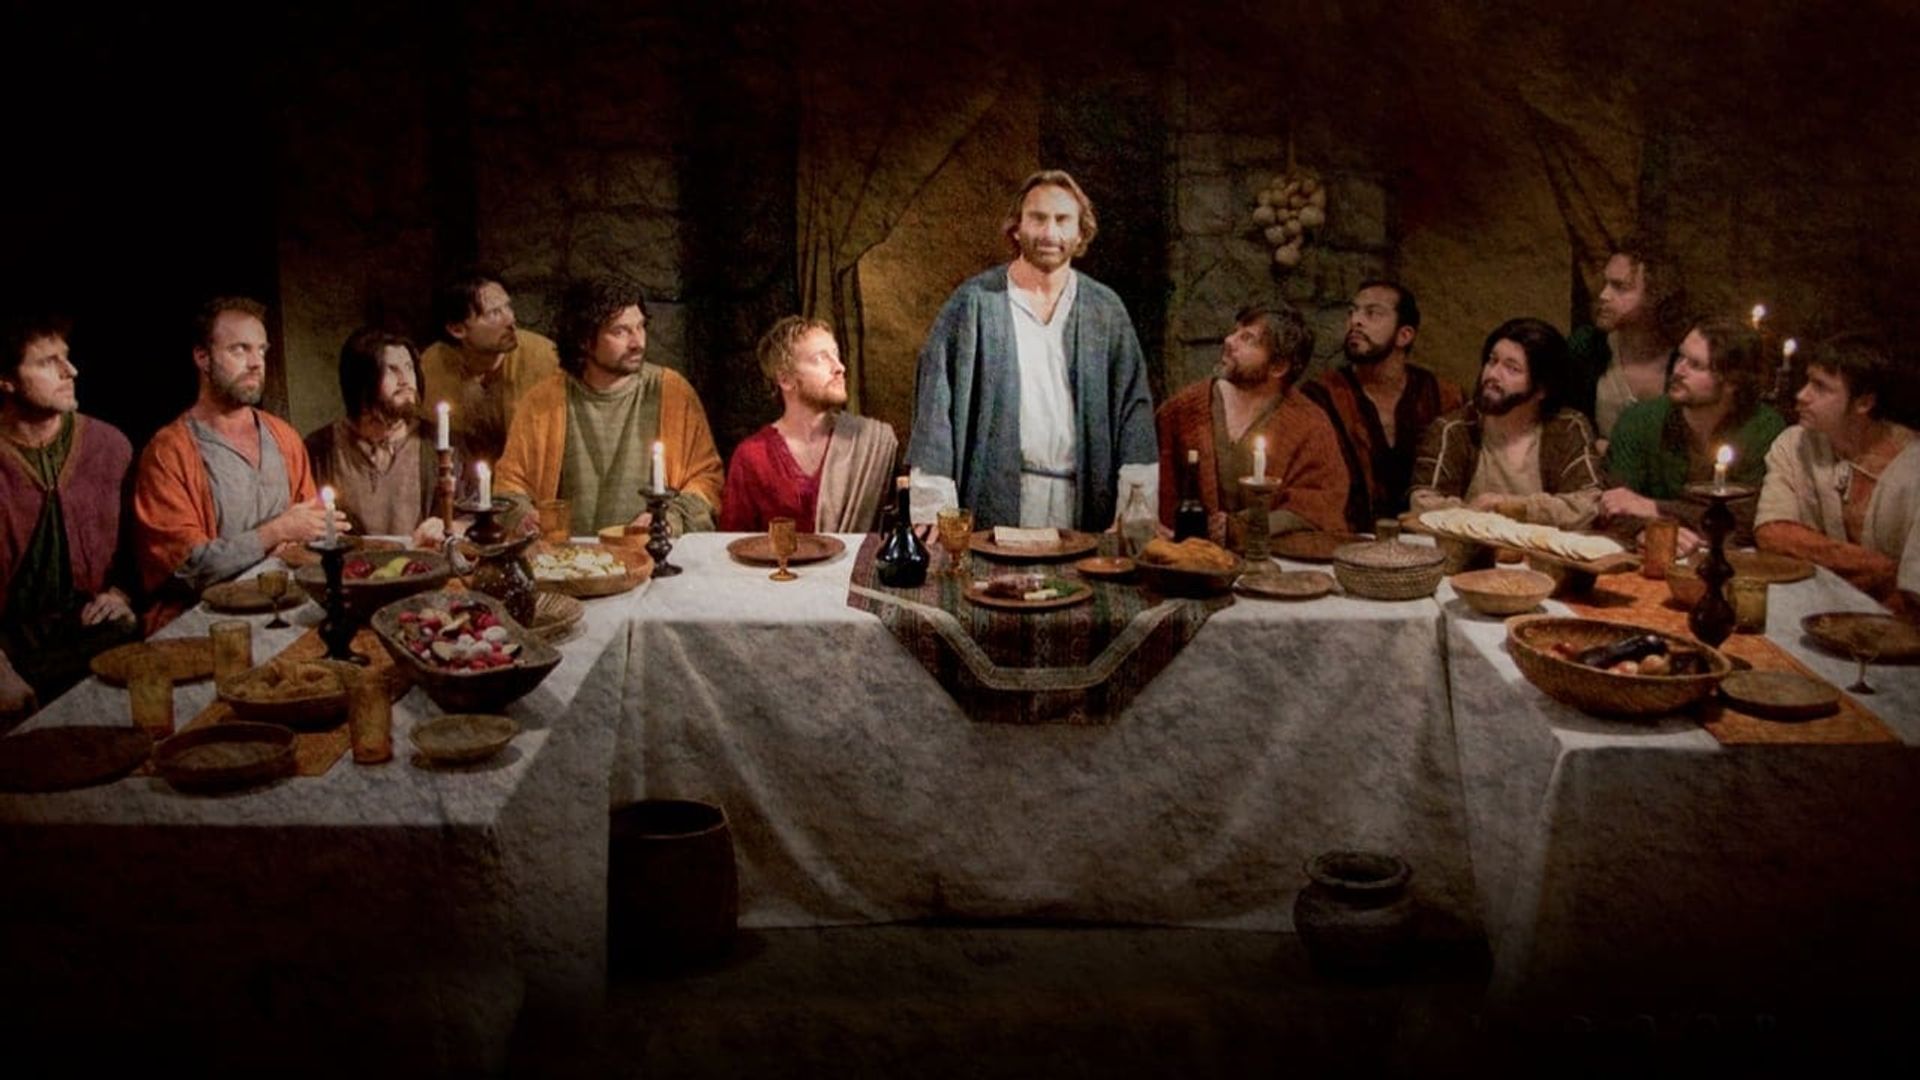 Apostle Peter and the Last Supper background